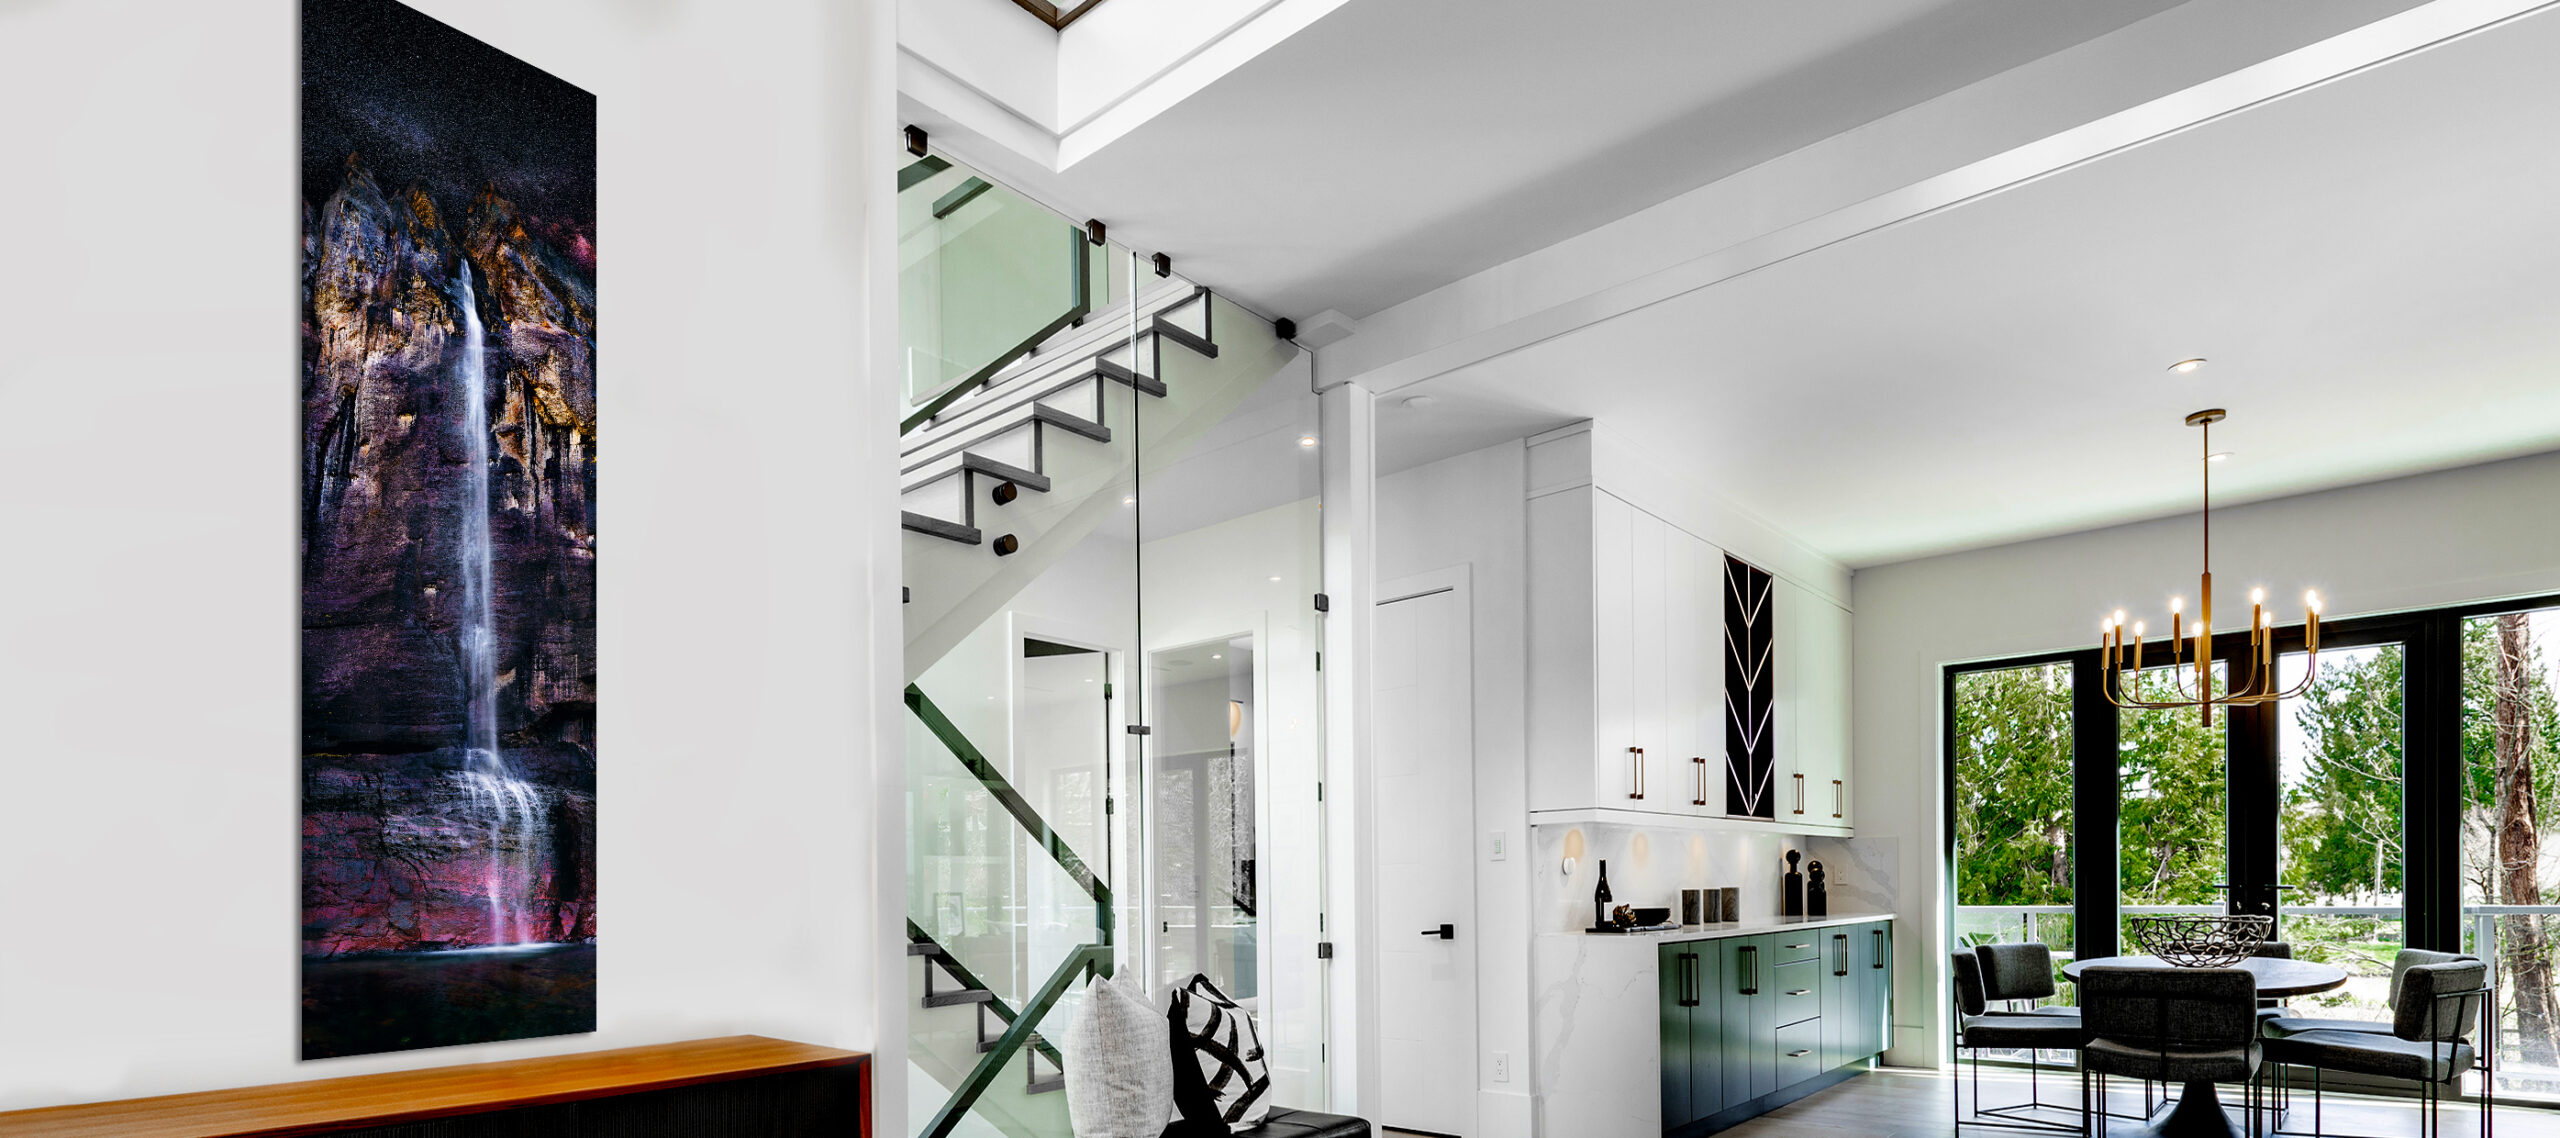 Entry,Hall,And,Foyer,With,Glass,Walls,Stairs,Console,Table